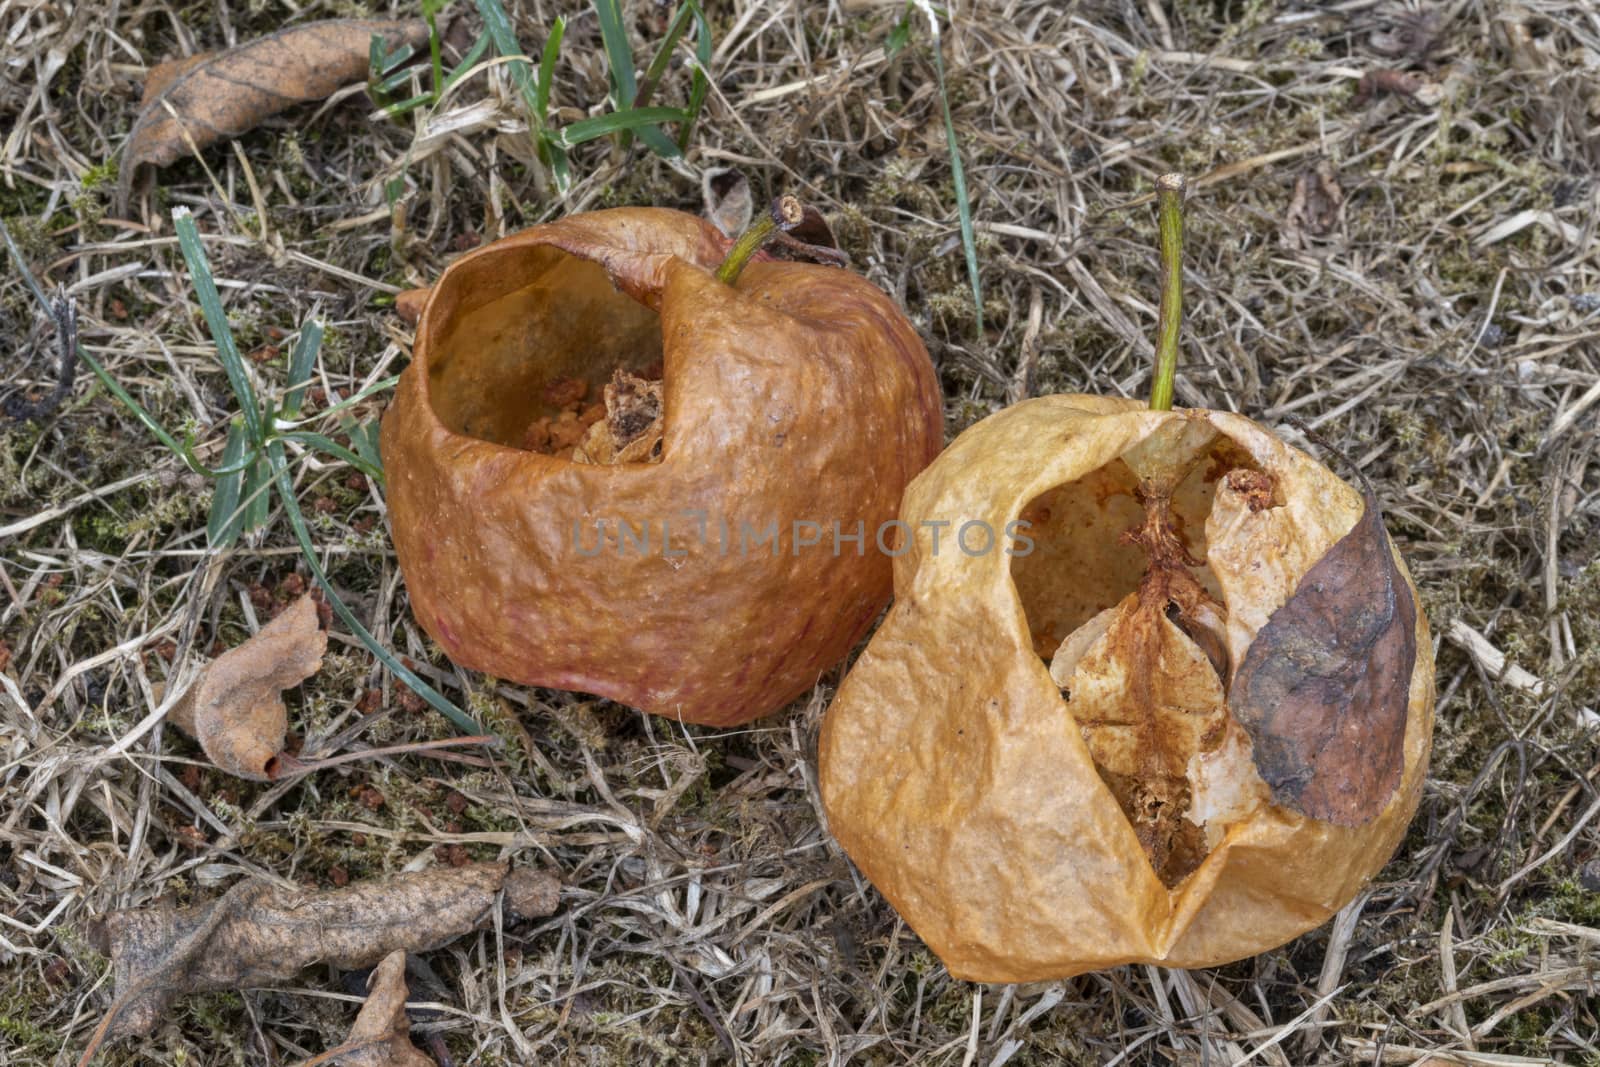 Two by wasps hollowed apples on a lawn in summer
